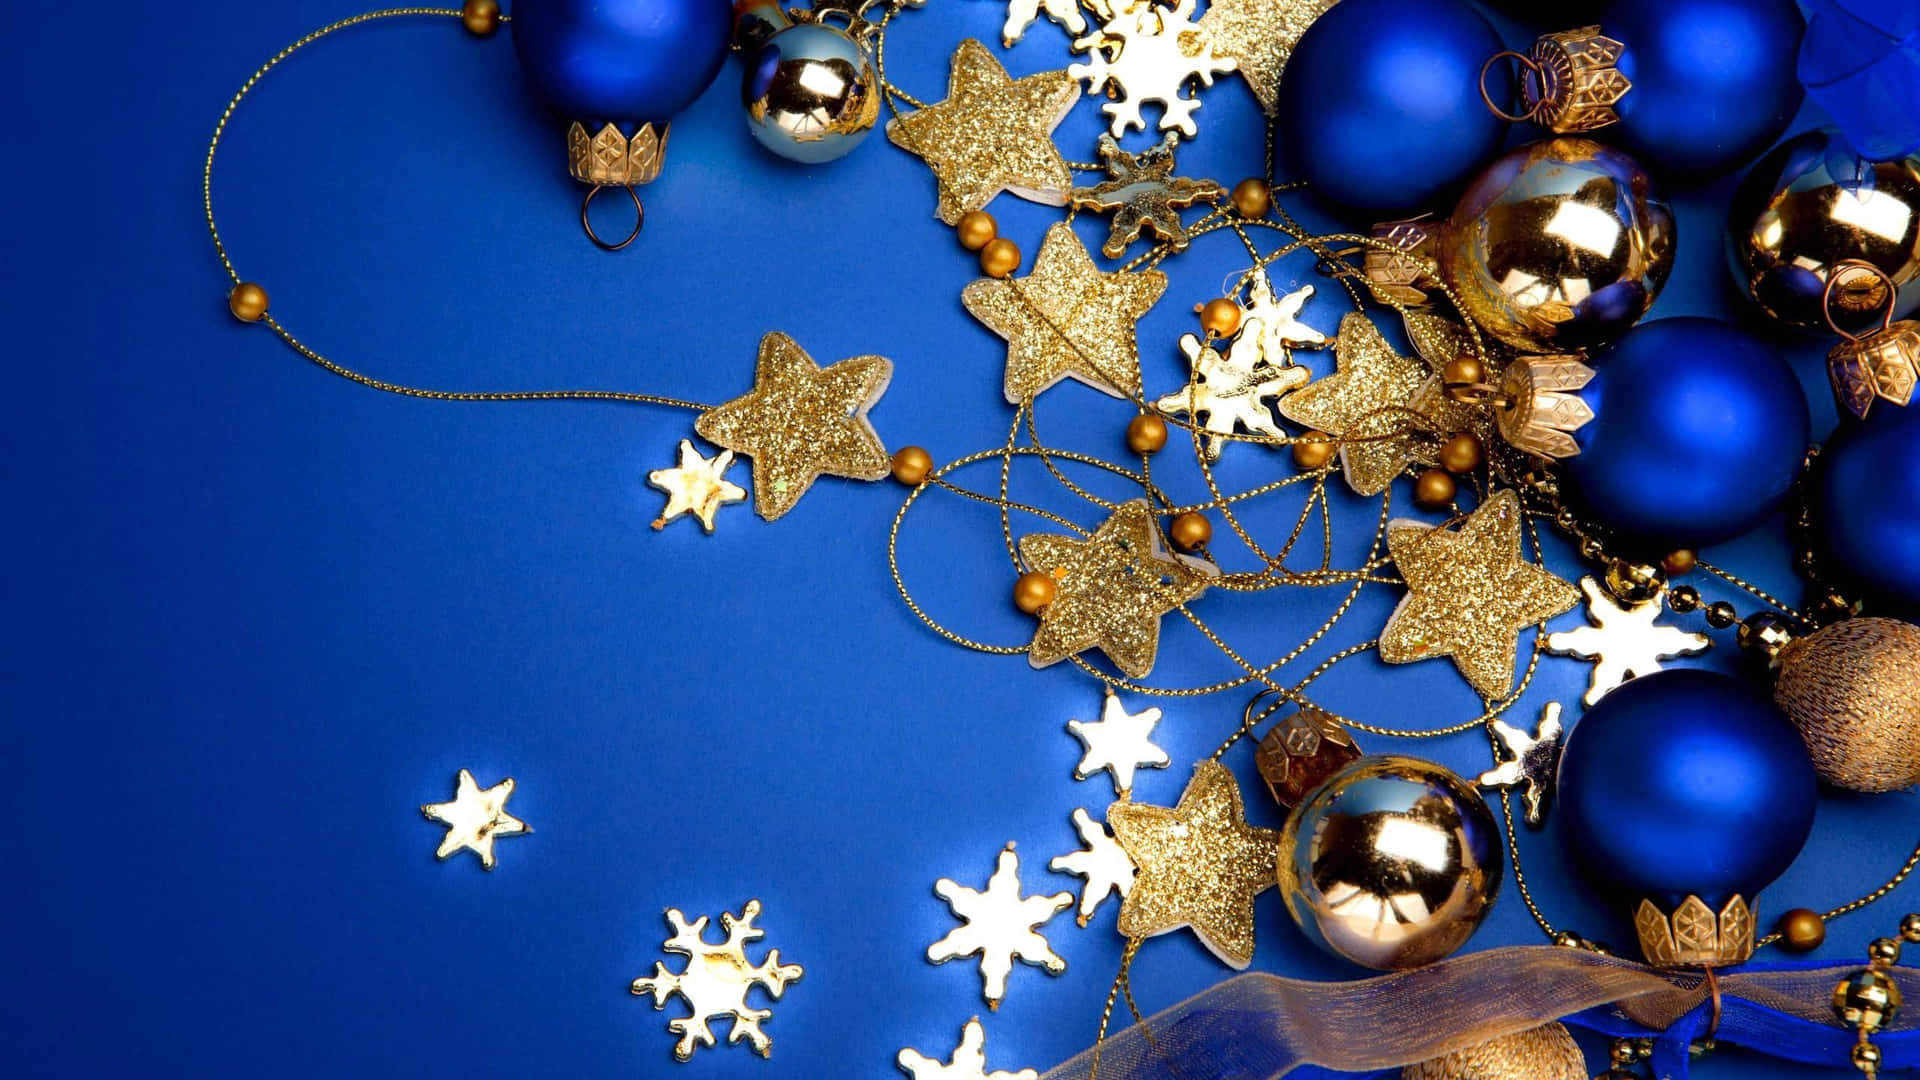 Feel the peace and tranquility of the season with this beautiful, blue Christmas. Wallpaper